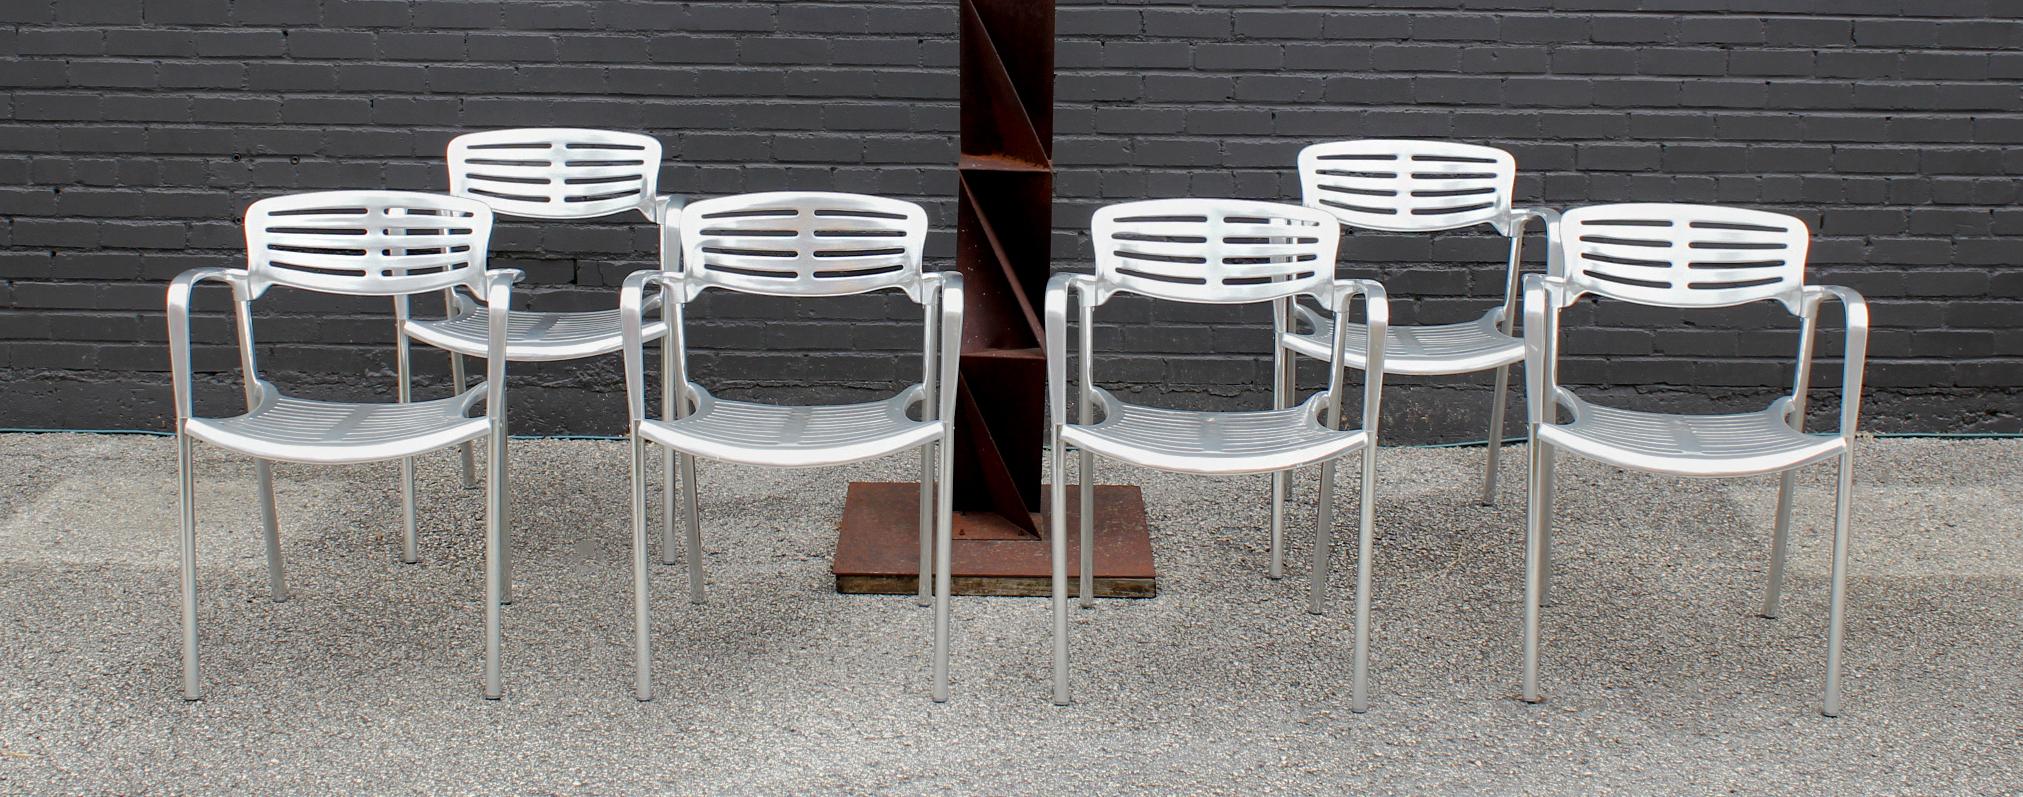 Jorge Pensi Toledo Patio Chairs Distributed by Knoll & Produced by Amat in Spain 6